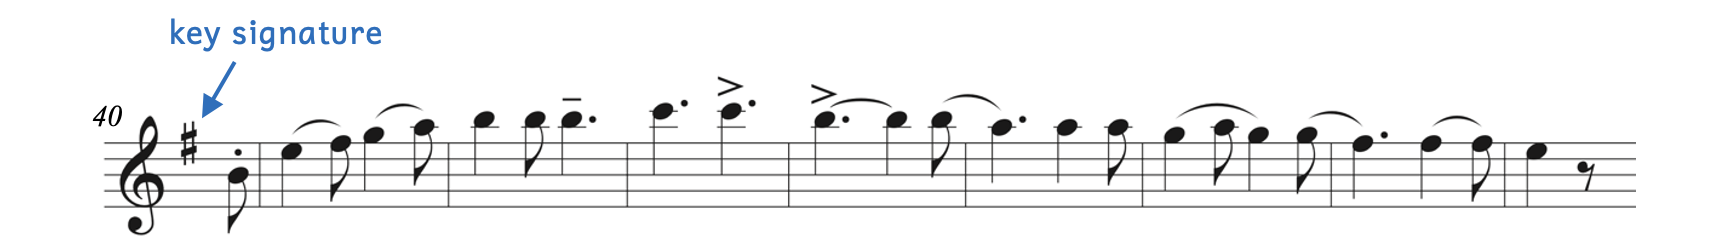 Finding the key from a single-line melody from Smetana's Má Vlast. The key signature has one sharp.